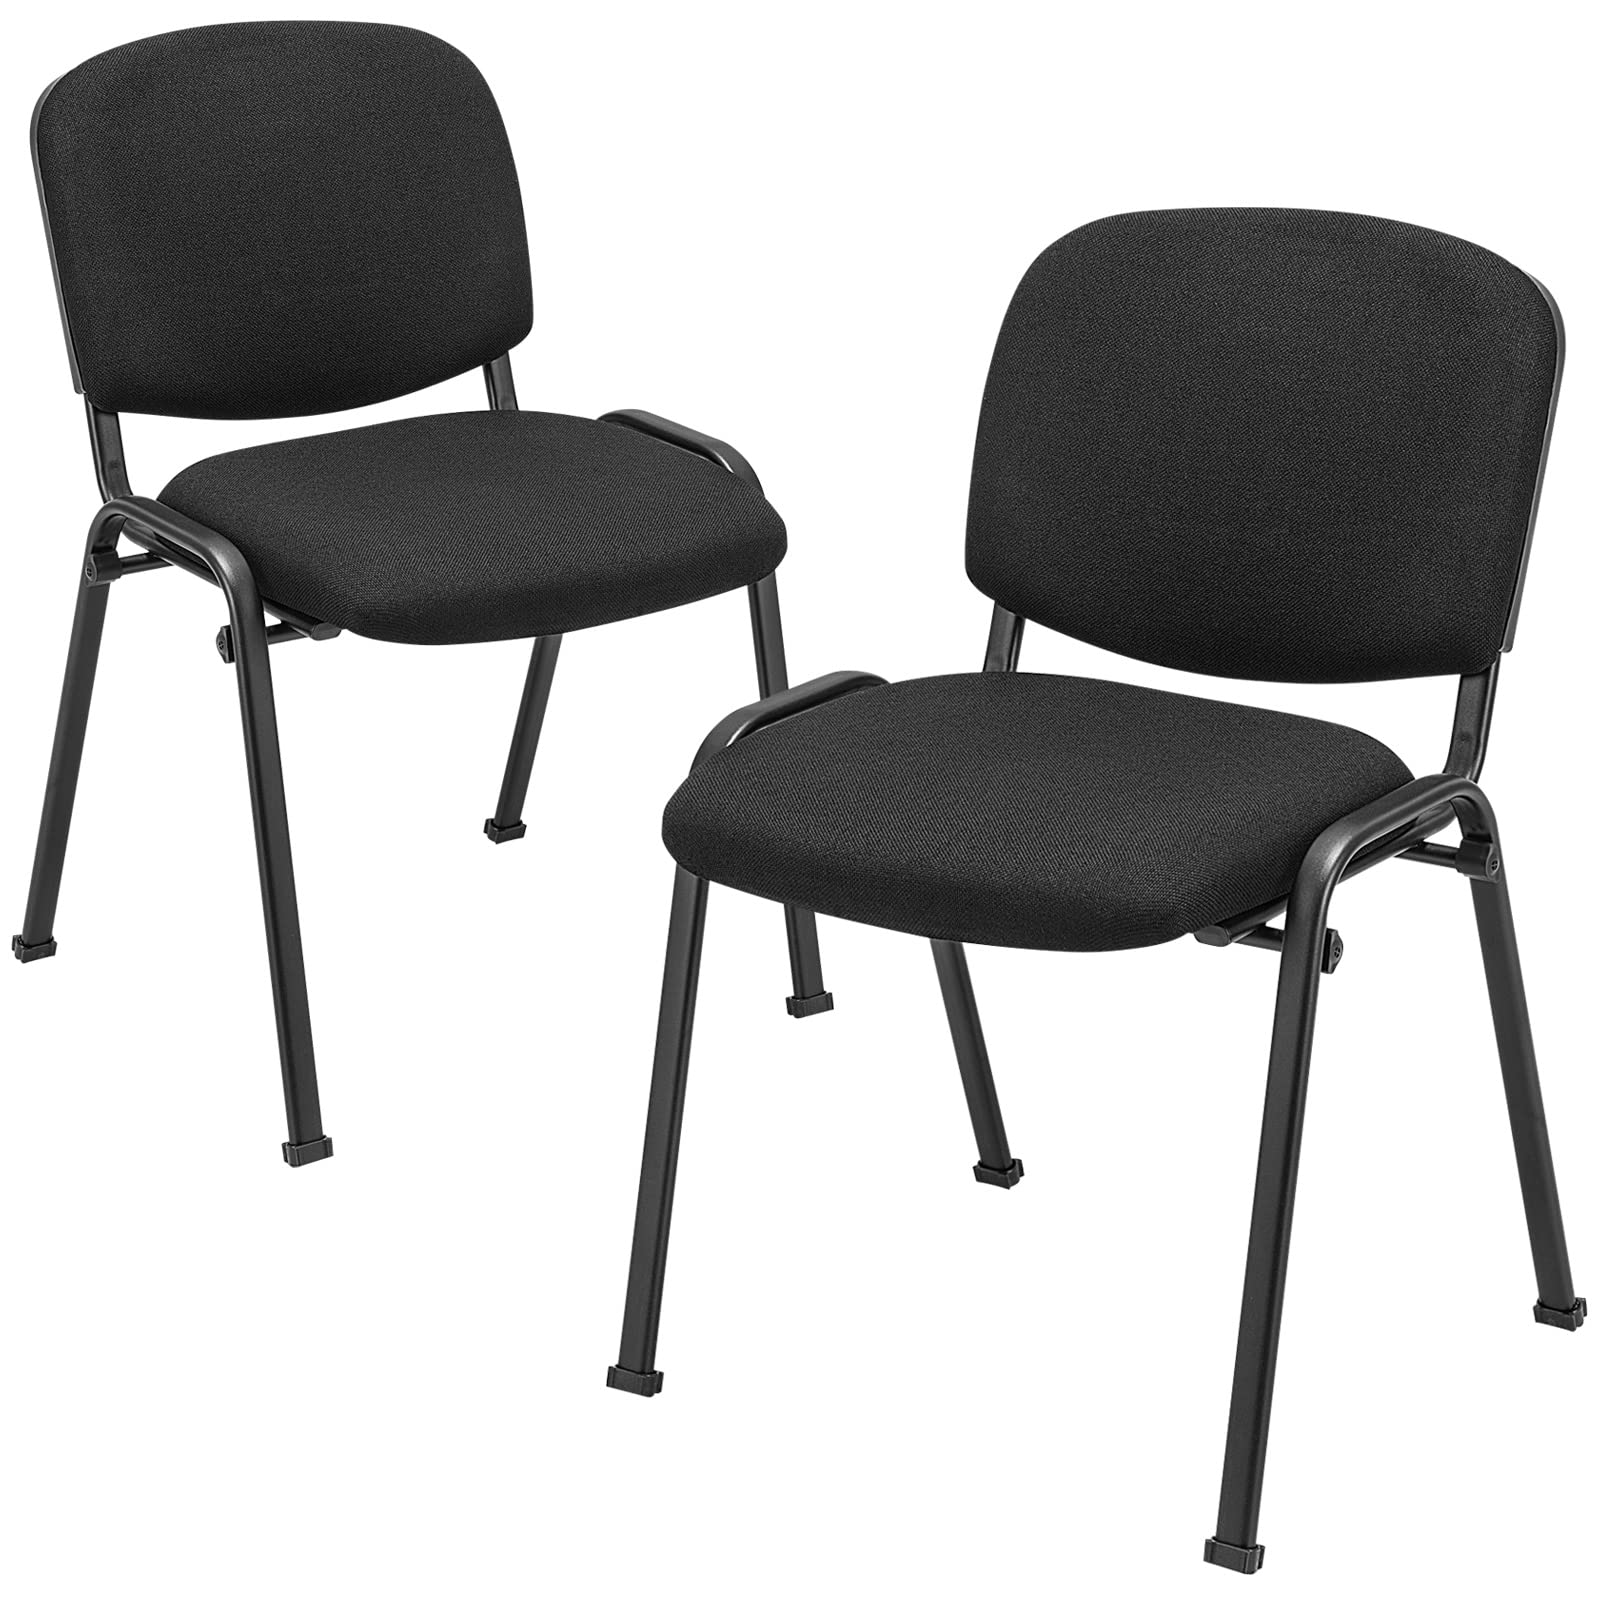 Tangkula Conference Room Chairs Set of 8, Stackable Office Guest Chairs with Upholstered Back & Seat, Ergonomic Office Reception Chairs for Waiting Room, Meeting Room, Reception, Black